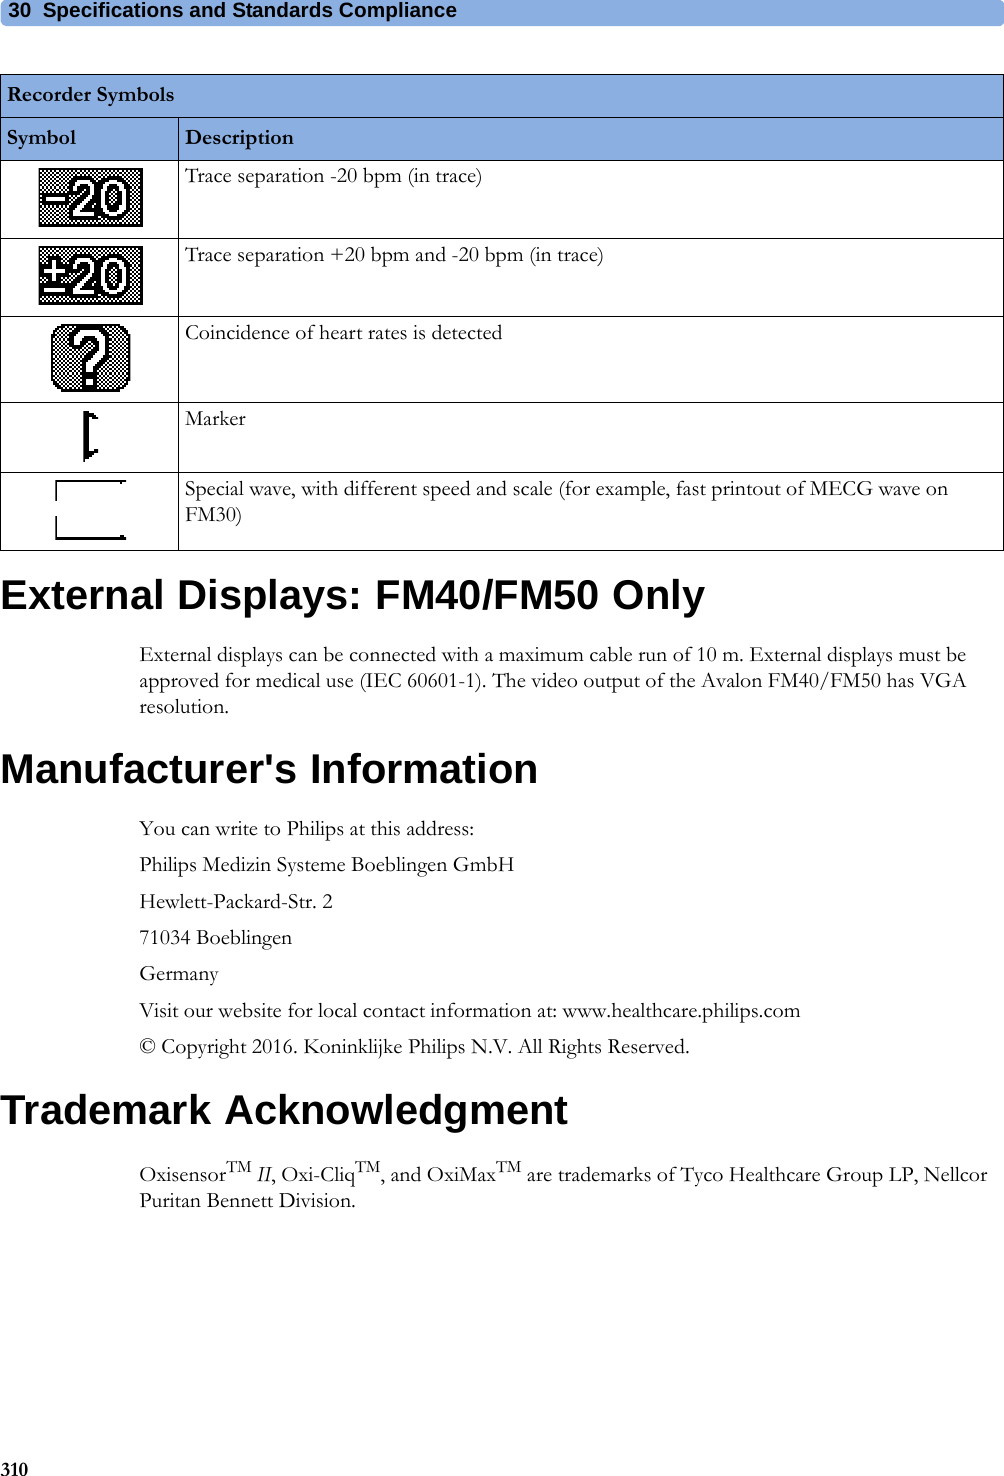 30  Specifications and Standards Compliance310External Displays: FM40/FM50 OnlyExternal displays can be connected with a maximum cable run of 10 m. External displays must be approved for medical use (IEC 60601-1). The video output of the Avalon FM40/FM50 has VGA resolution.Manufacturer&apos;s InformationYou can write to Philips at this address:Philips Medizin Systeme Boeblingen GmbHHewlett-Packard-Str. 271034 BoeblingenGermanyVisit our website for local contact information at: www.healthcare.philips.com© Copyright 2016. Koninklijke Philips N.V. All Rights Reserved.Trademark AcknowledgmentOxisensorTM II, Oxi-CliqTM, and OxiMaxTM are trademarks of Tyco Healthcare Group LP, Nellcor Puritan Bennett Division.Trace separation -20 bpm (in trace)Trace separation +20 bpm and -20 bpm (in trace)Coincidence of heart rates is detectedMarkerSpecial wave, with different speed and scale (for example, fast printout of MECG wave on FM30)Recorder SymbolsSymbol Description